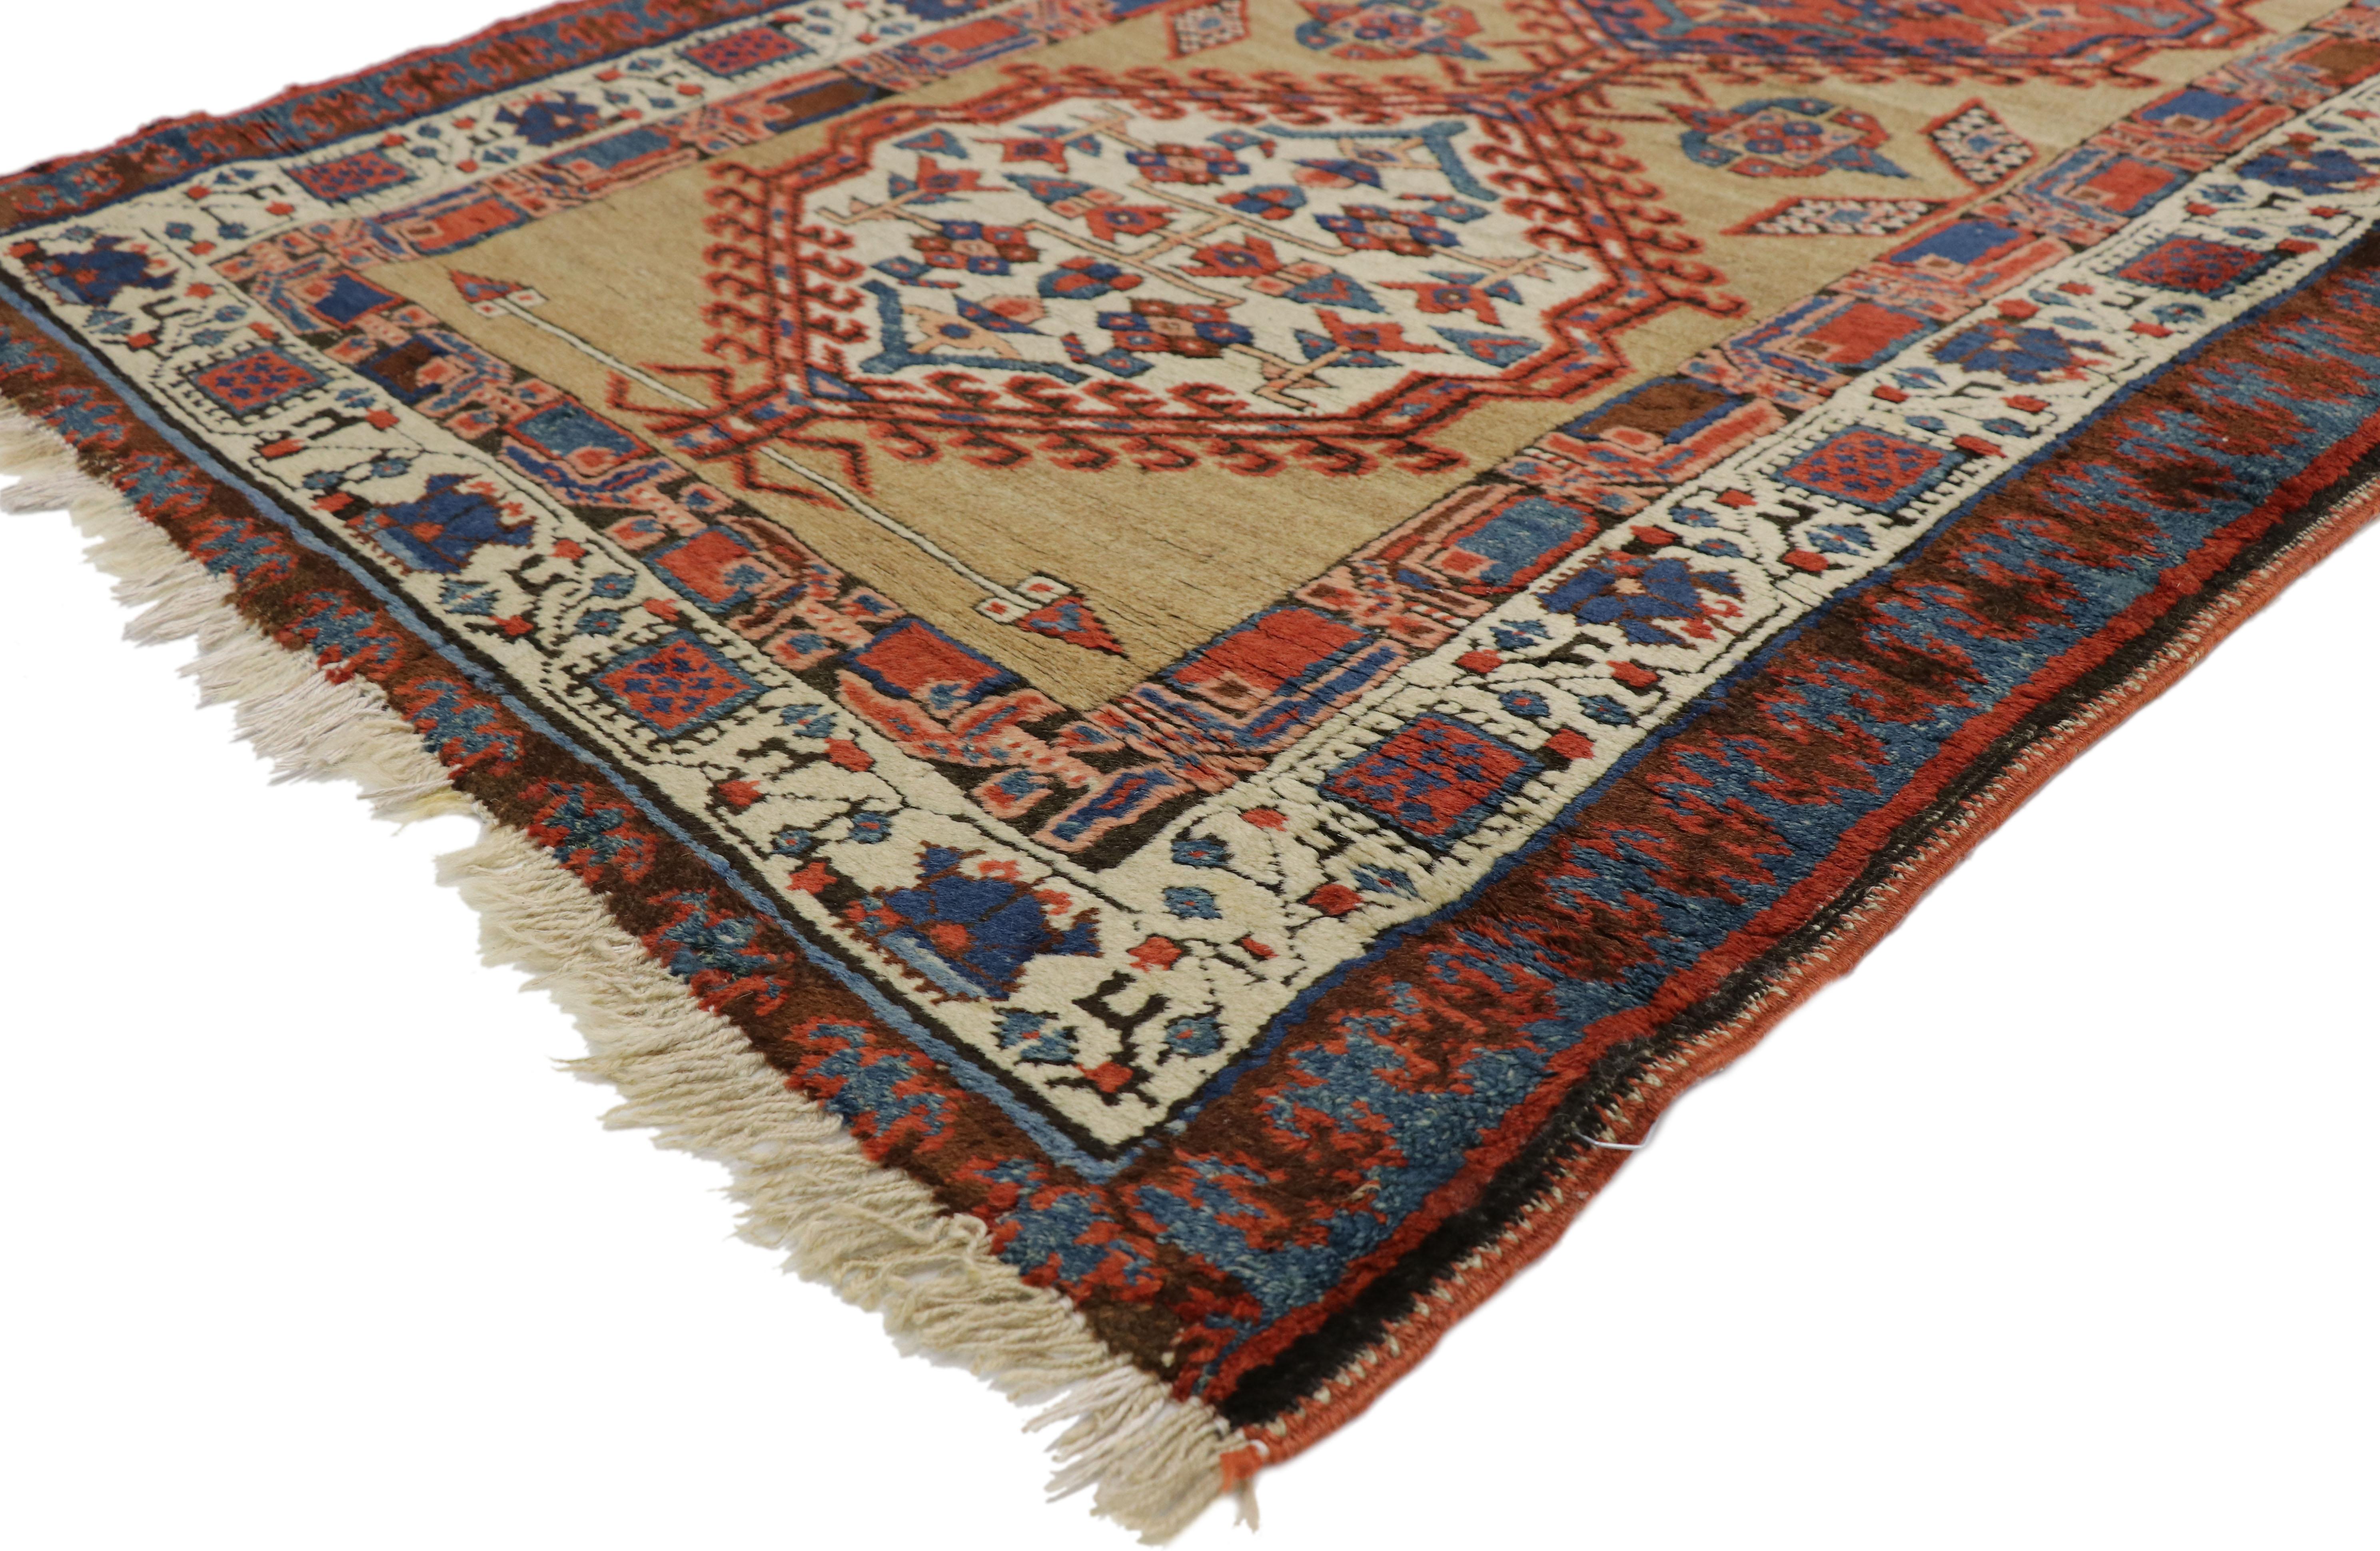 72989, antique Persian Sarab runner, long hallway runner. Emanating elegance and grace, this Antique Persian Sarab Runner is a breathtaking example of Persian weaving. Up close the detail is incredibly intricate, and from a distance the curving